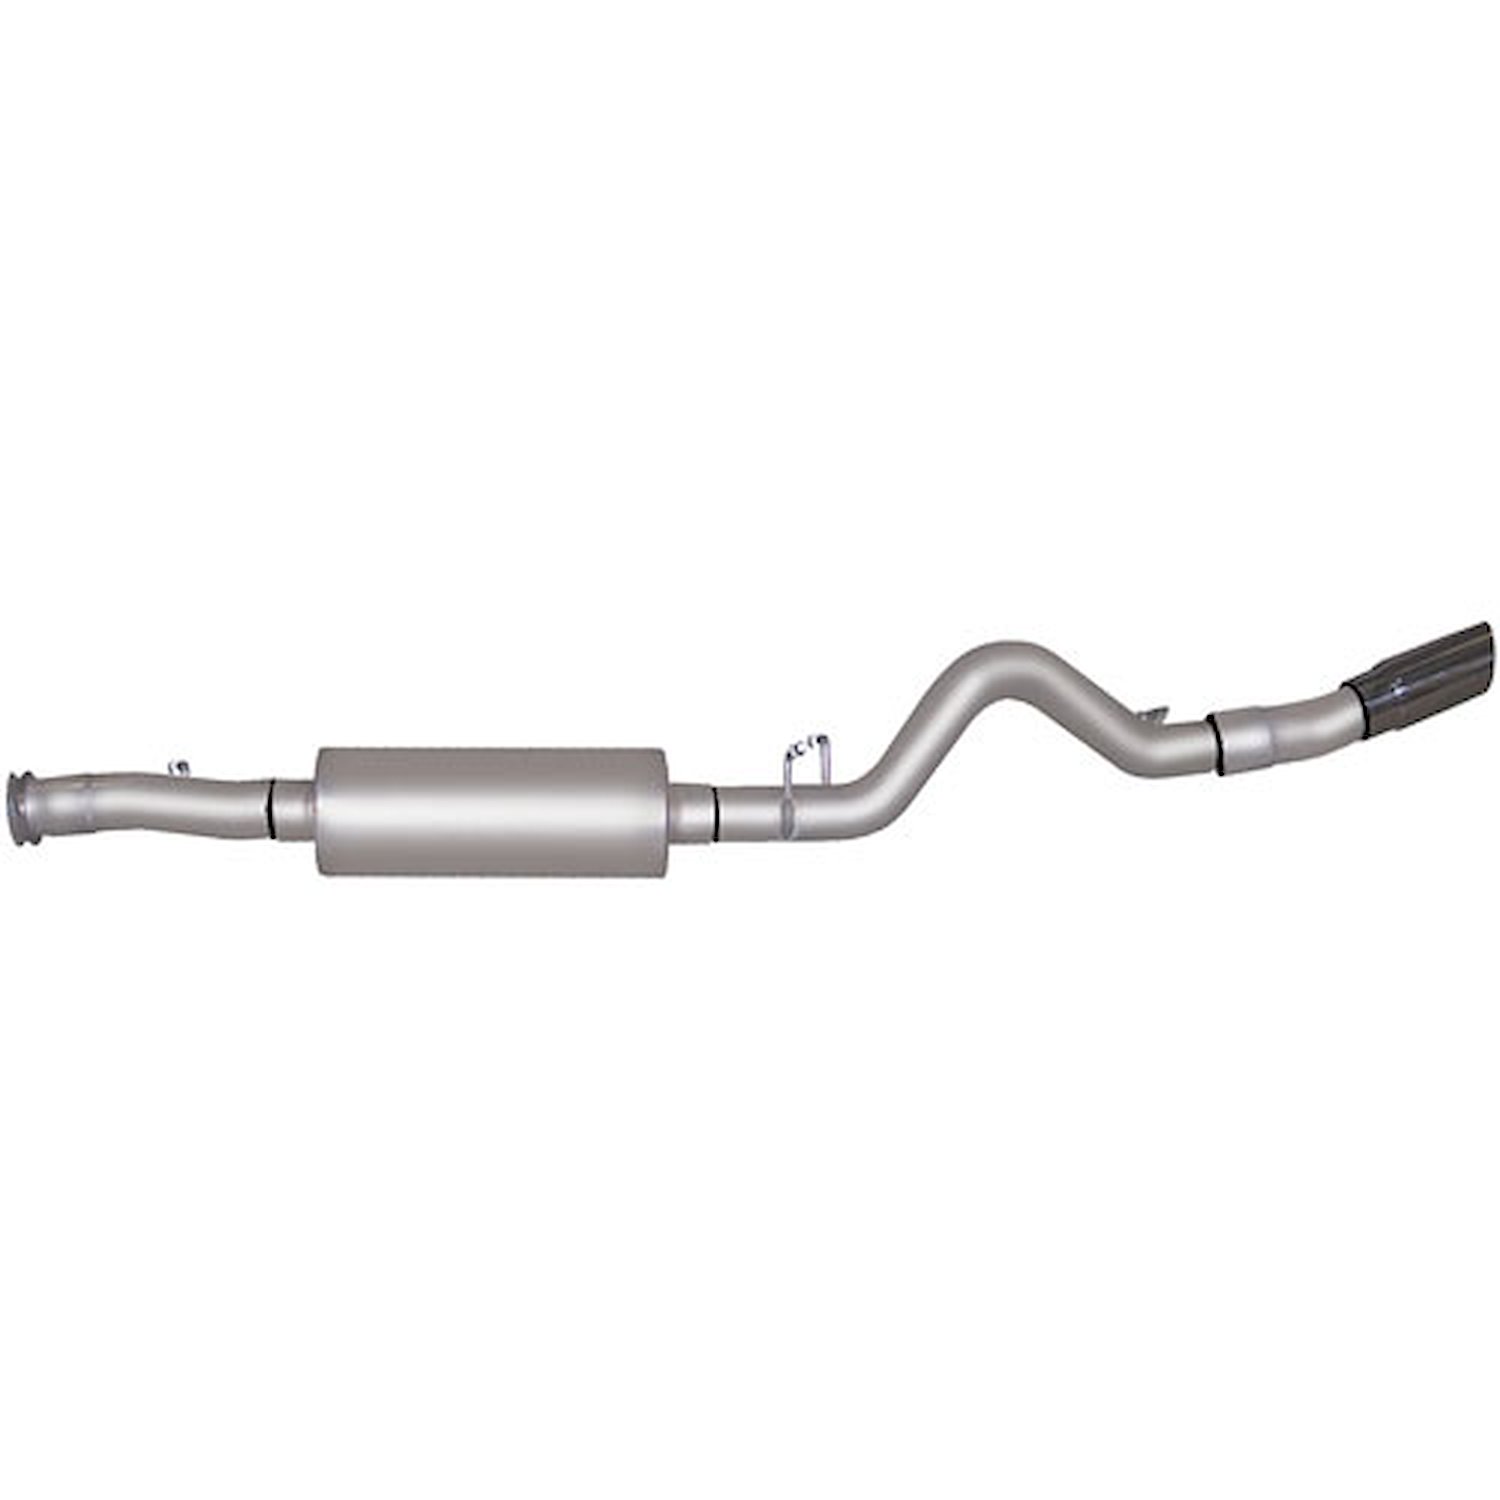 Swept-Side Cat-Back Exhaust 2007-10 Cadillac Escalade 6.2L